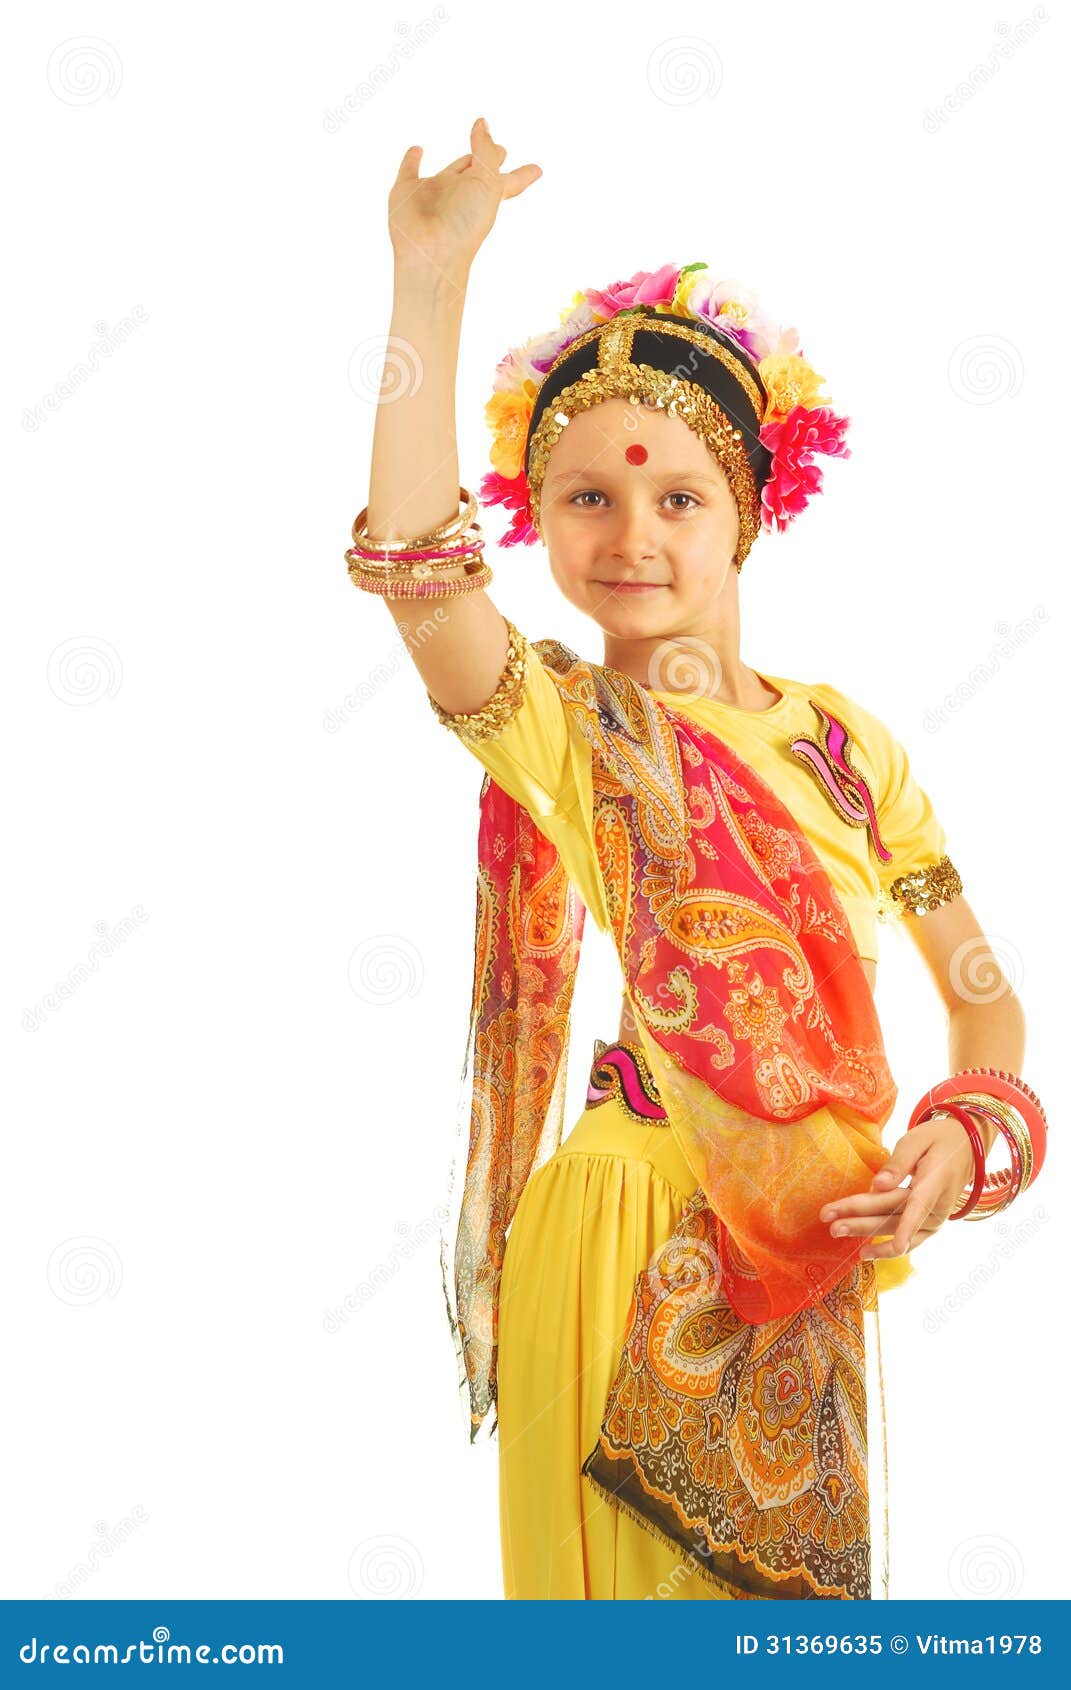 Indian Girl Performing Dance Royalty Free Stock Photo - Image: 31369635